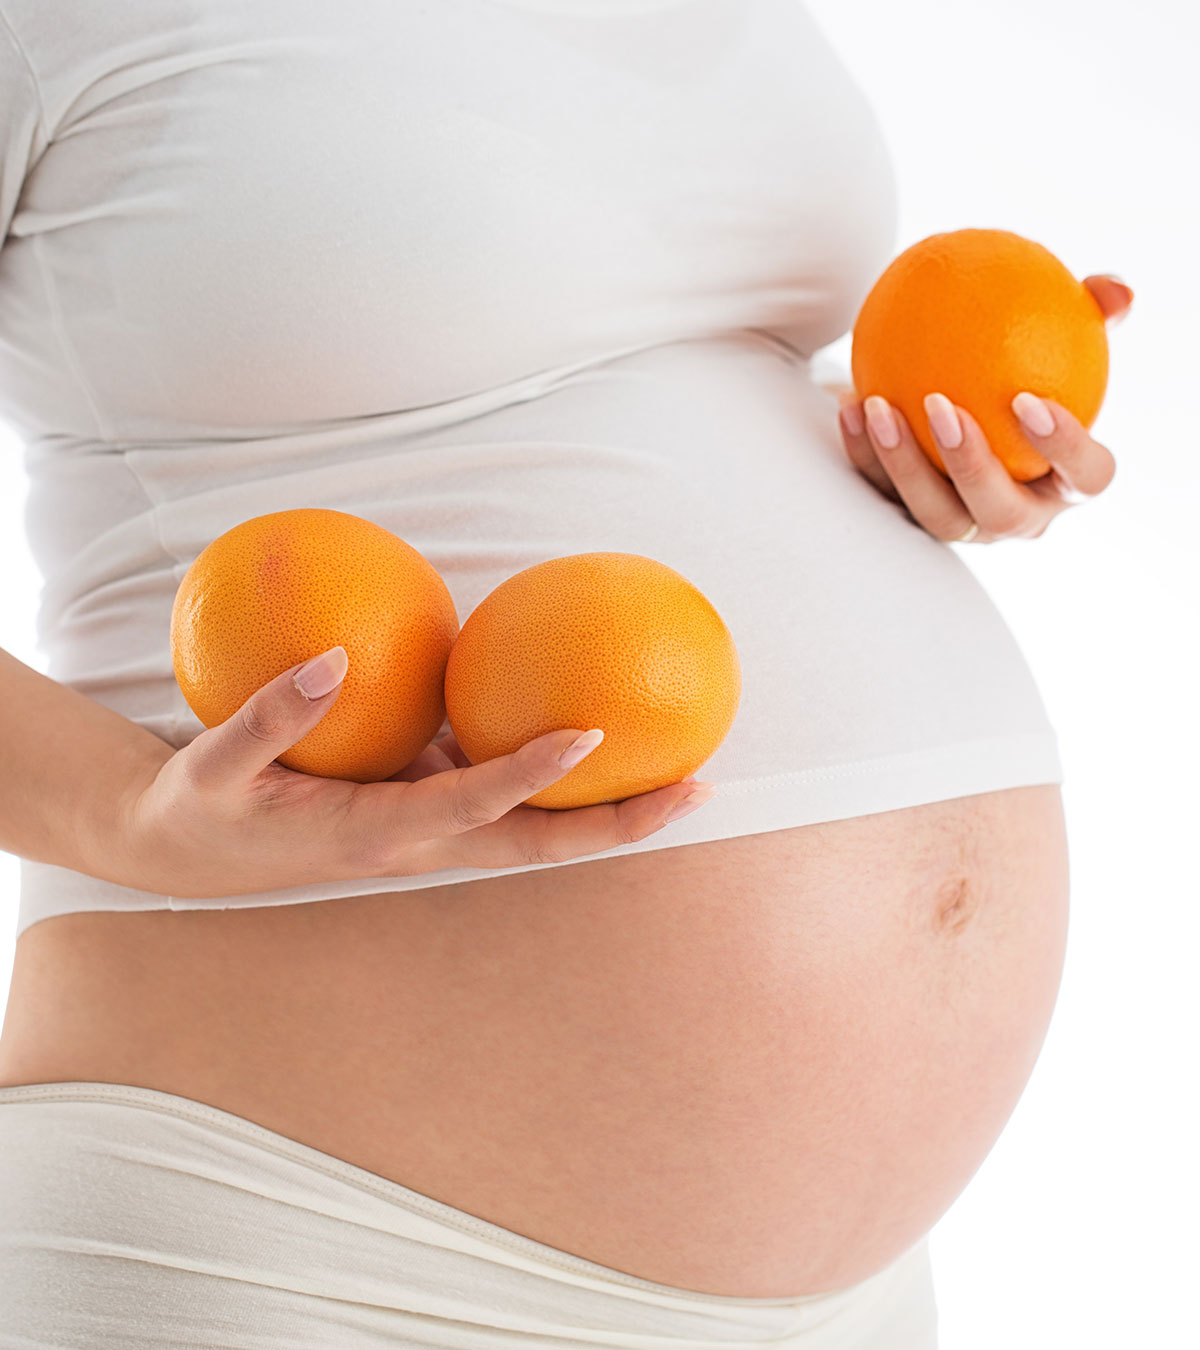 Vitamin C During Pregnancy: Safety, Dosage & Side Effects